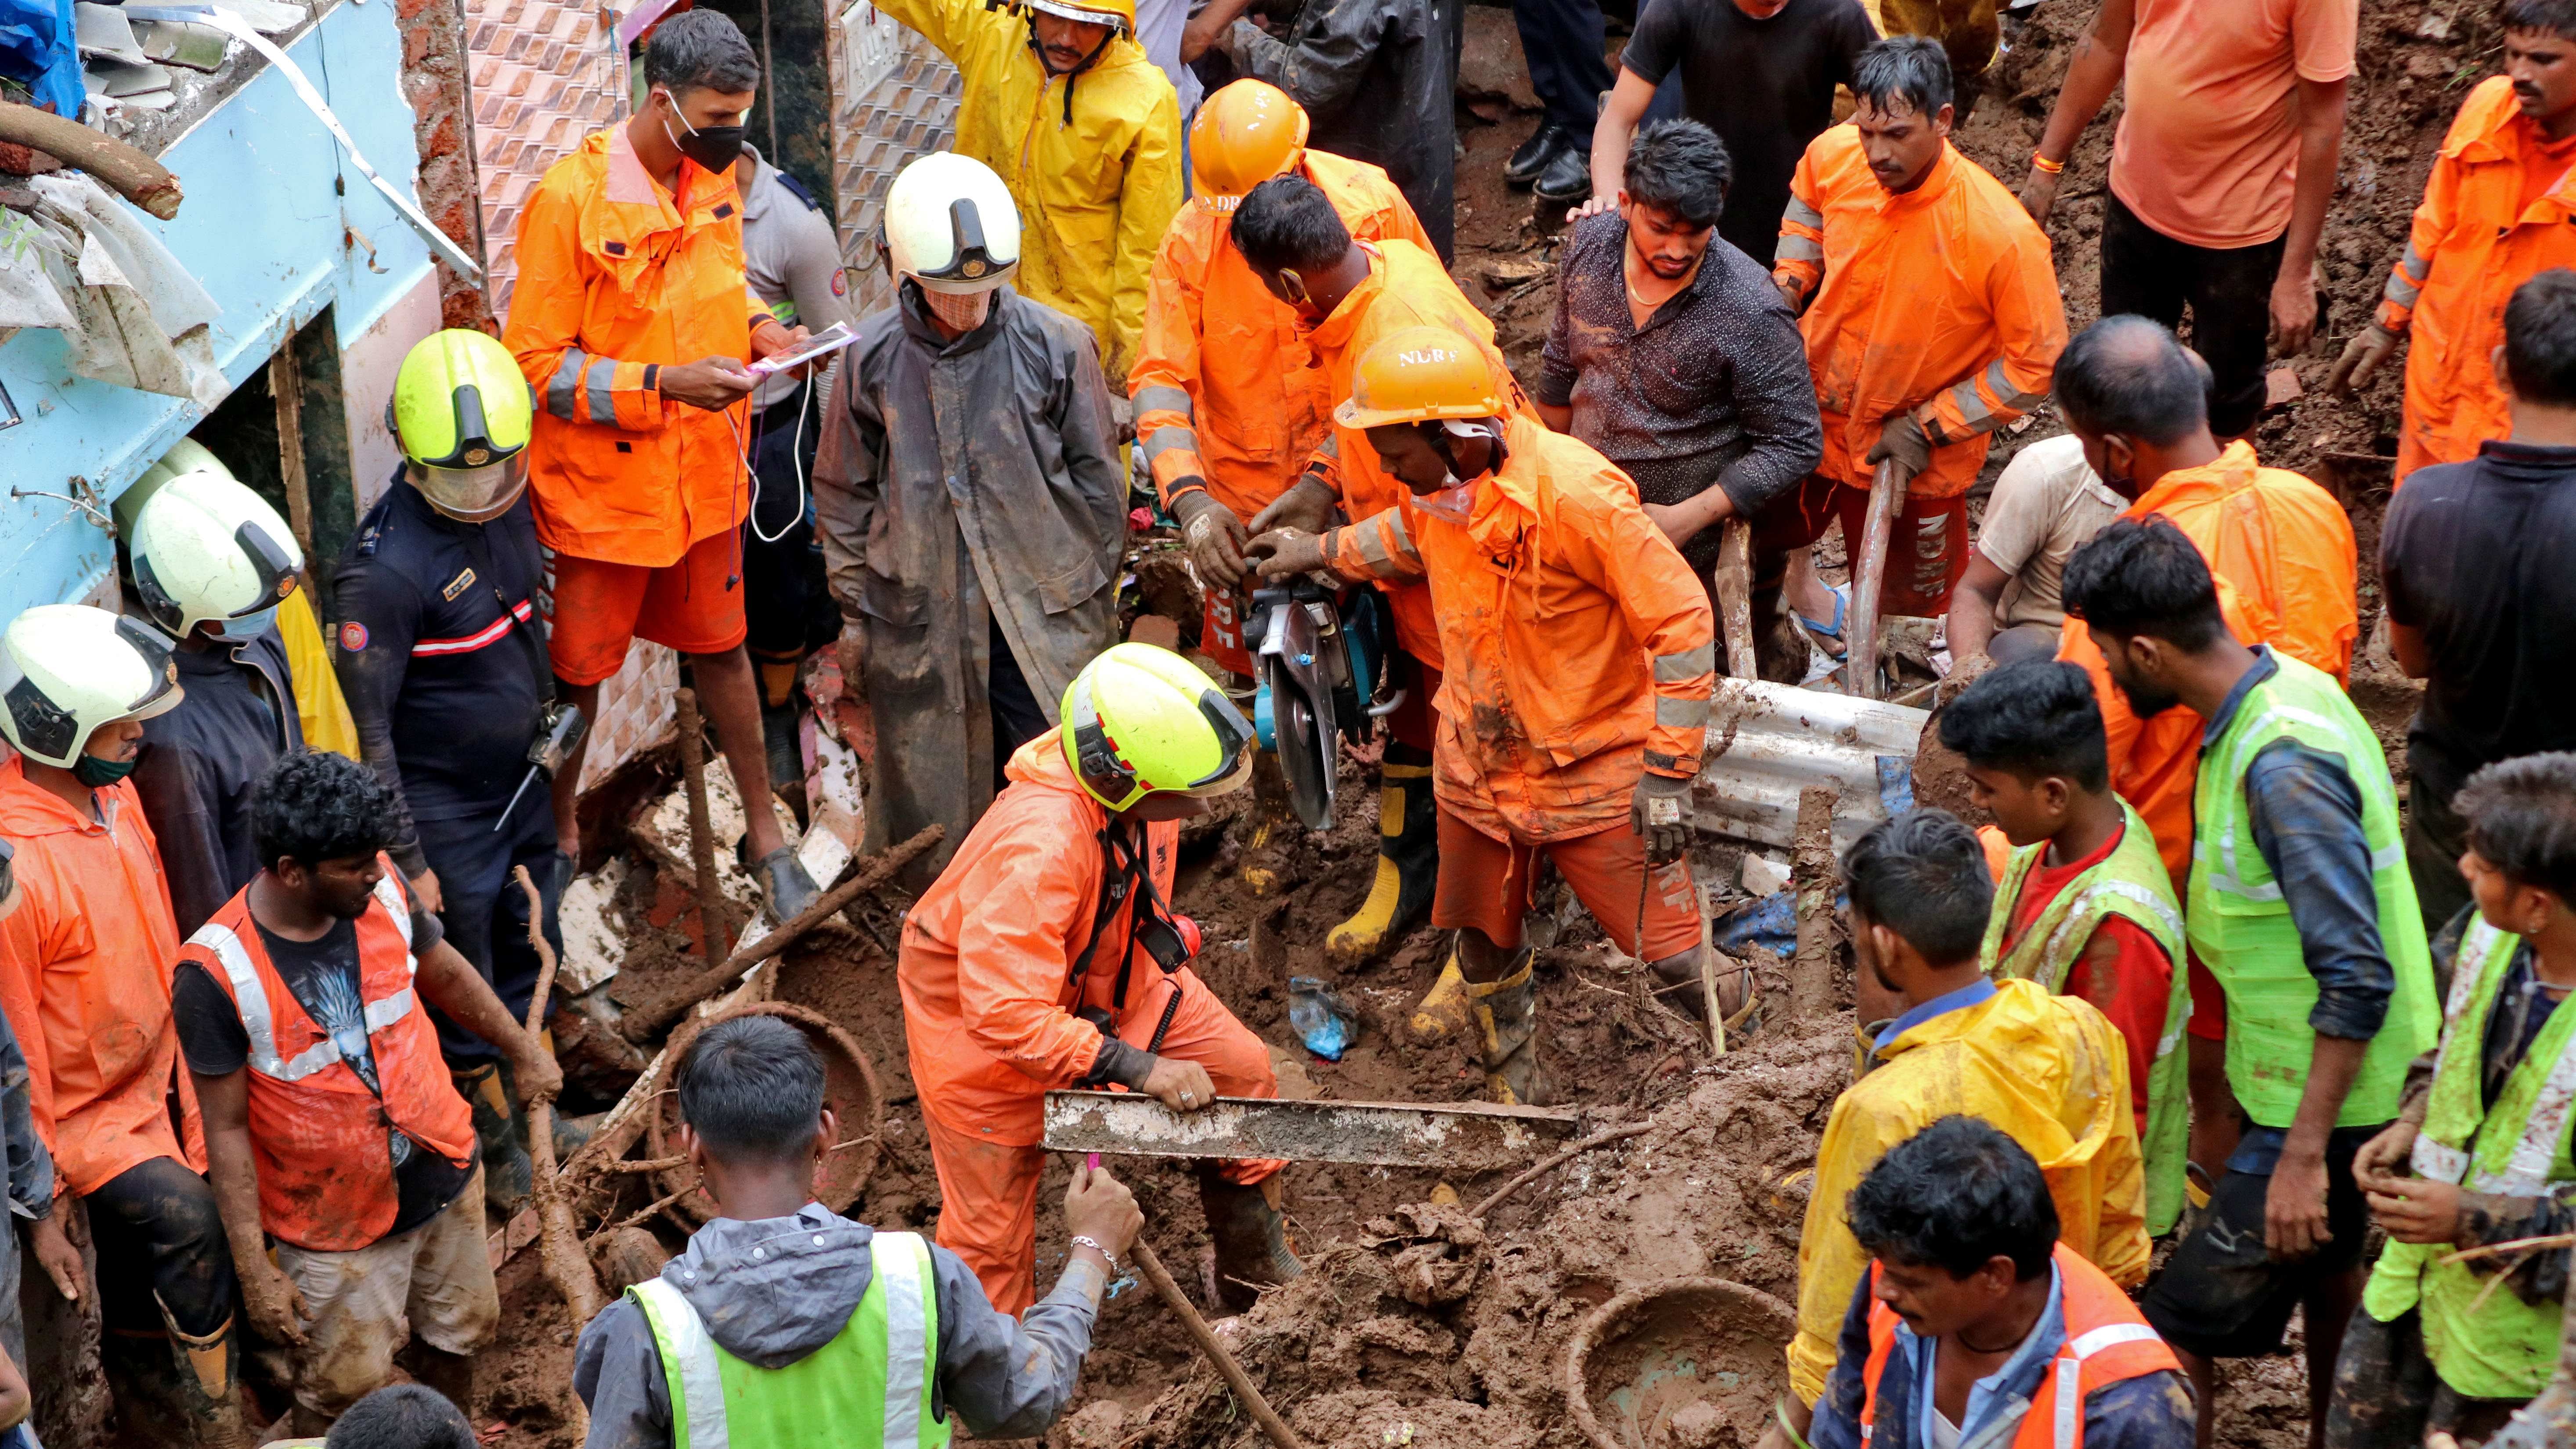 Rescue workers remove debris as they search for survivors after a residential house collapsed due to landslide caused by heavy rainfall in Mumbai. Credit: Reuters